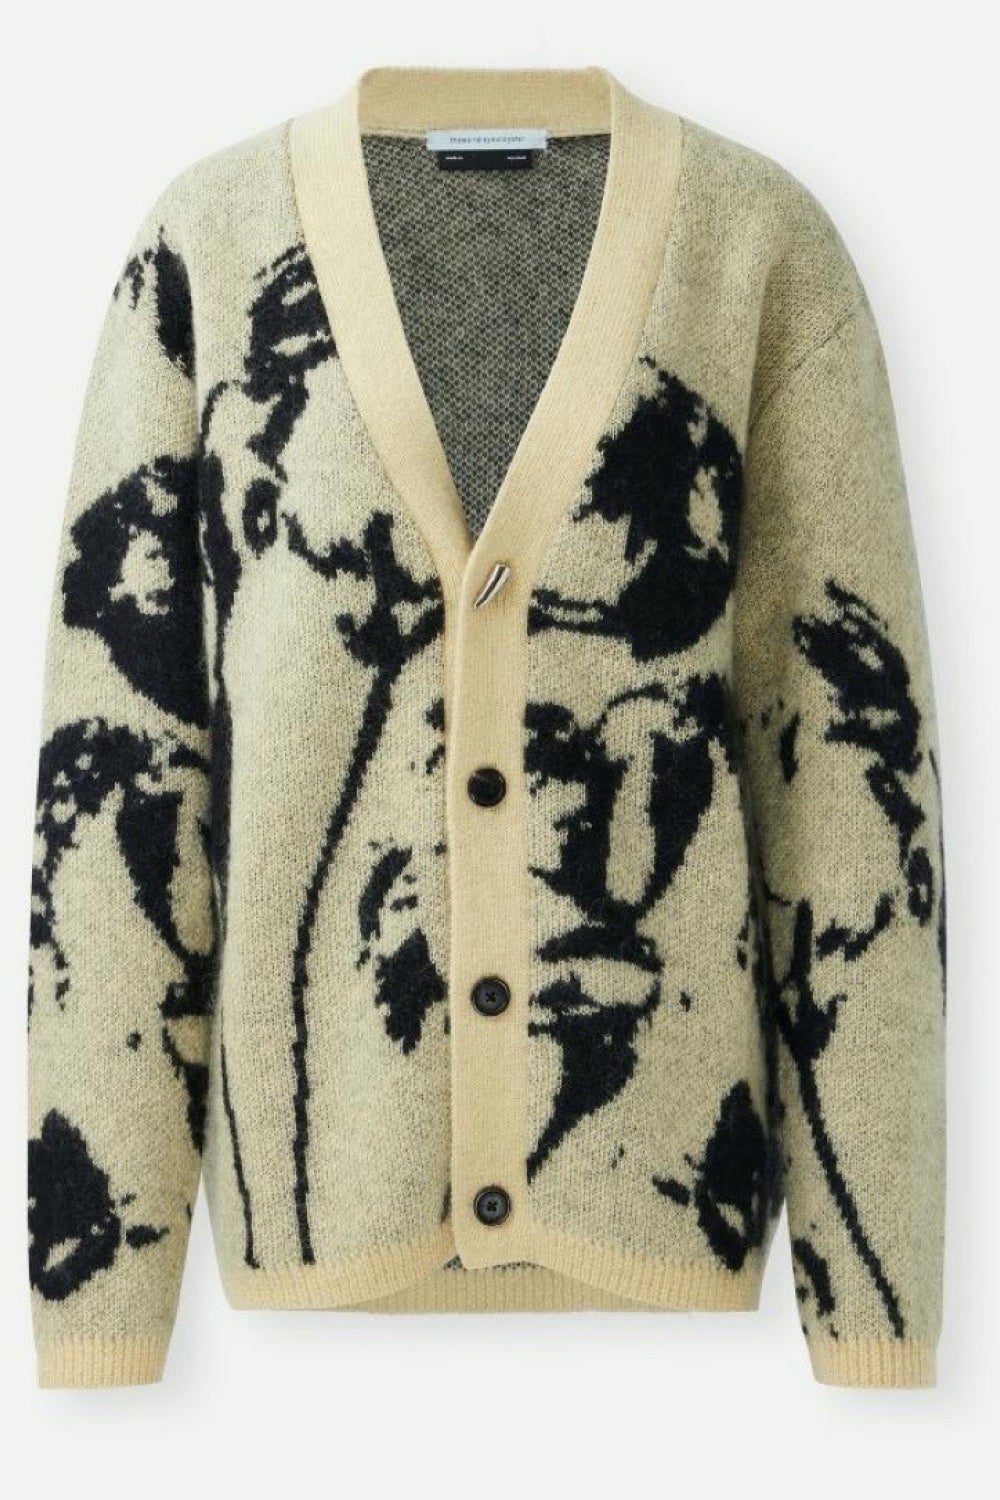 abstract print silver horn button cardigan sweater